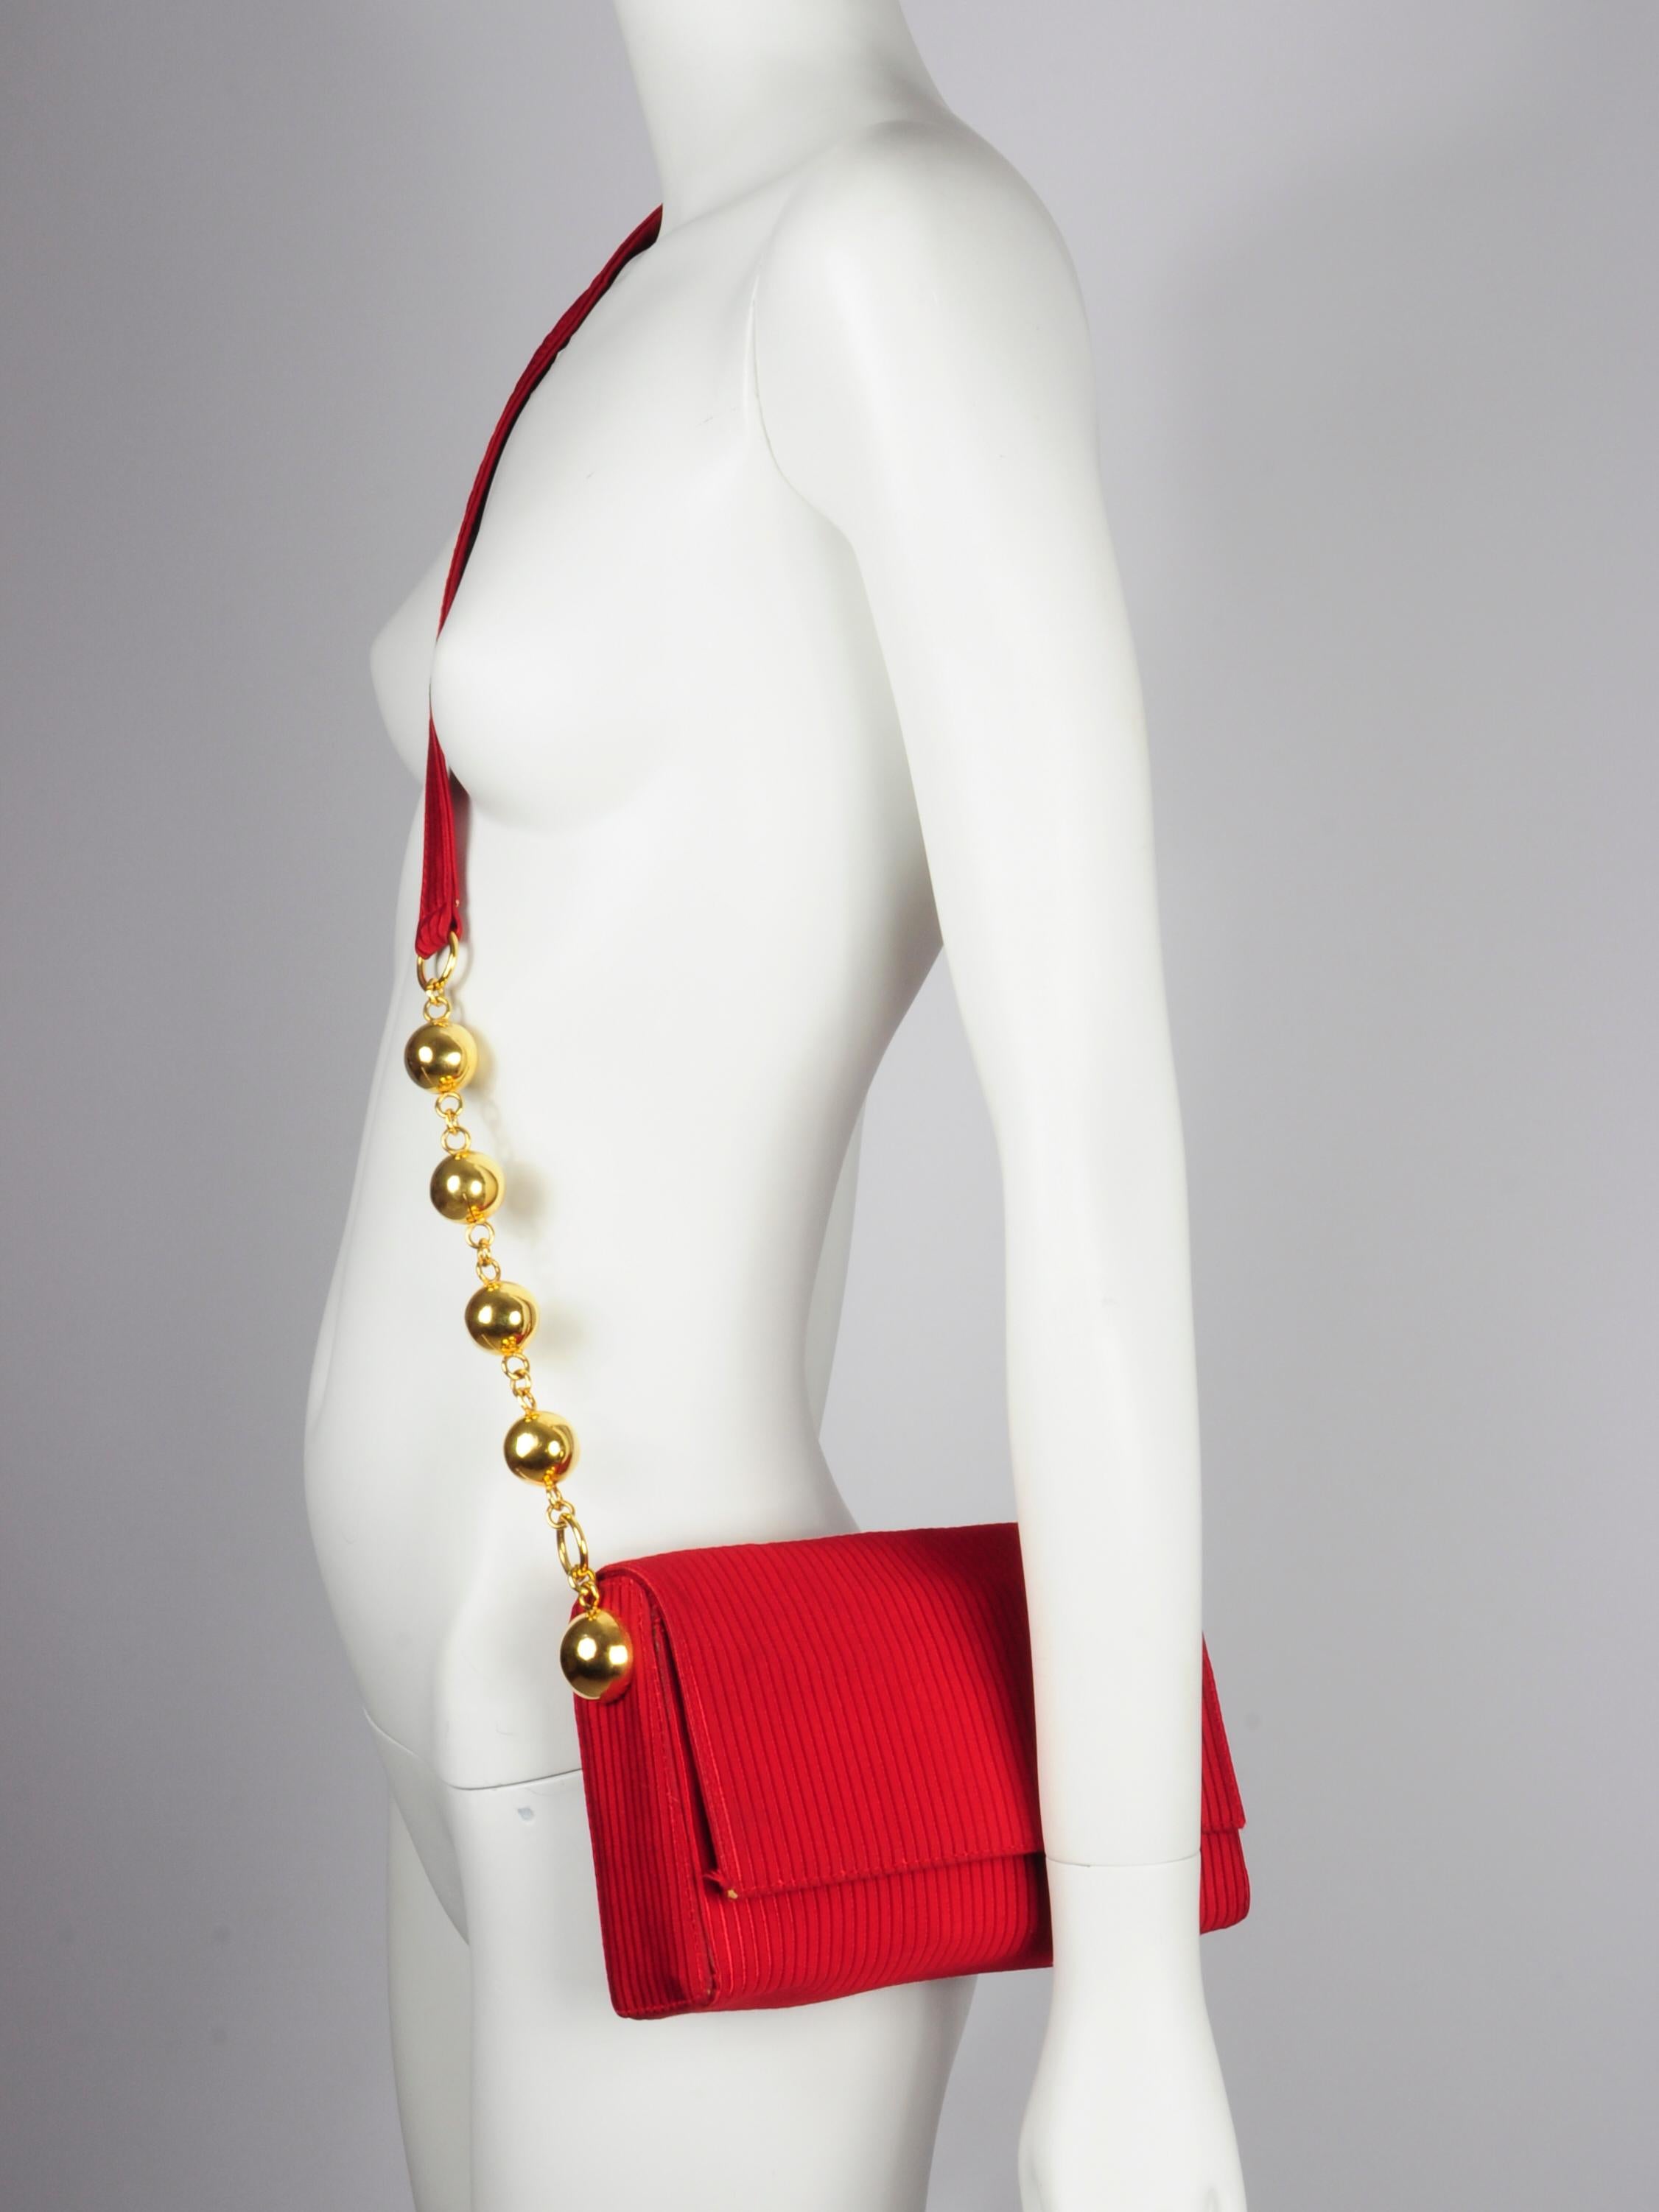 Gianni Versace Couture crossbody bag in red with gold spheres / balls on the strap from the 1980s. It has a beautiful round shaped top and flap that combines well with the golden spheres / balls on the crossbody strap. The fabric is striped